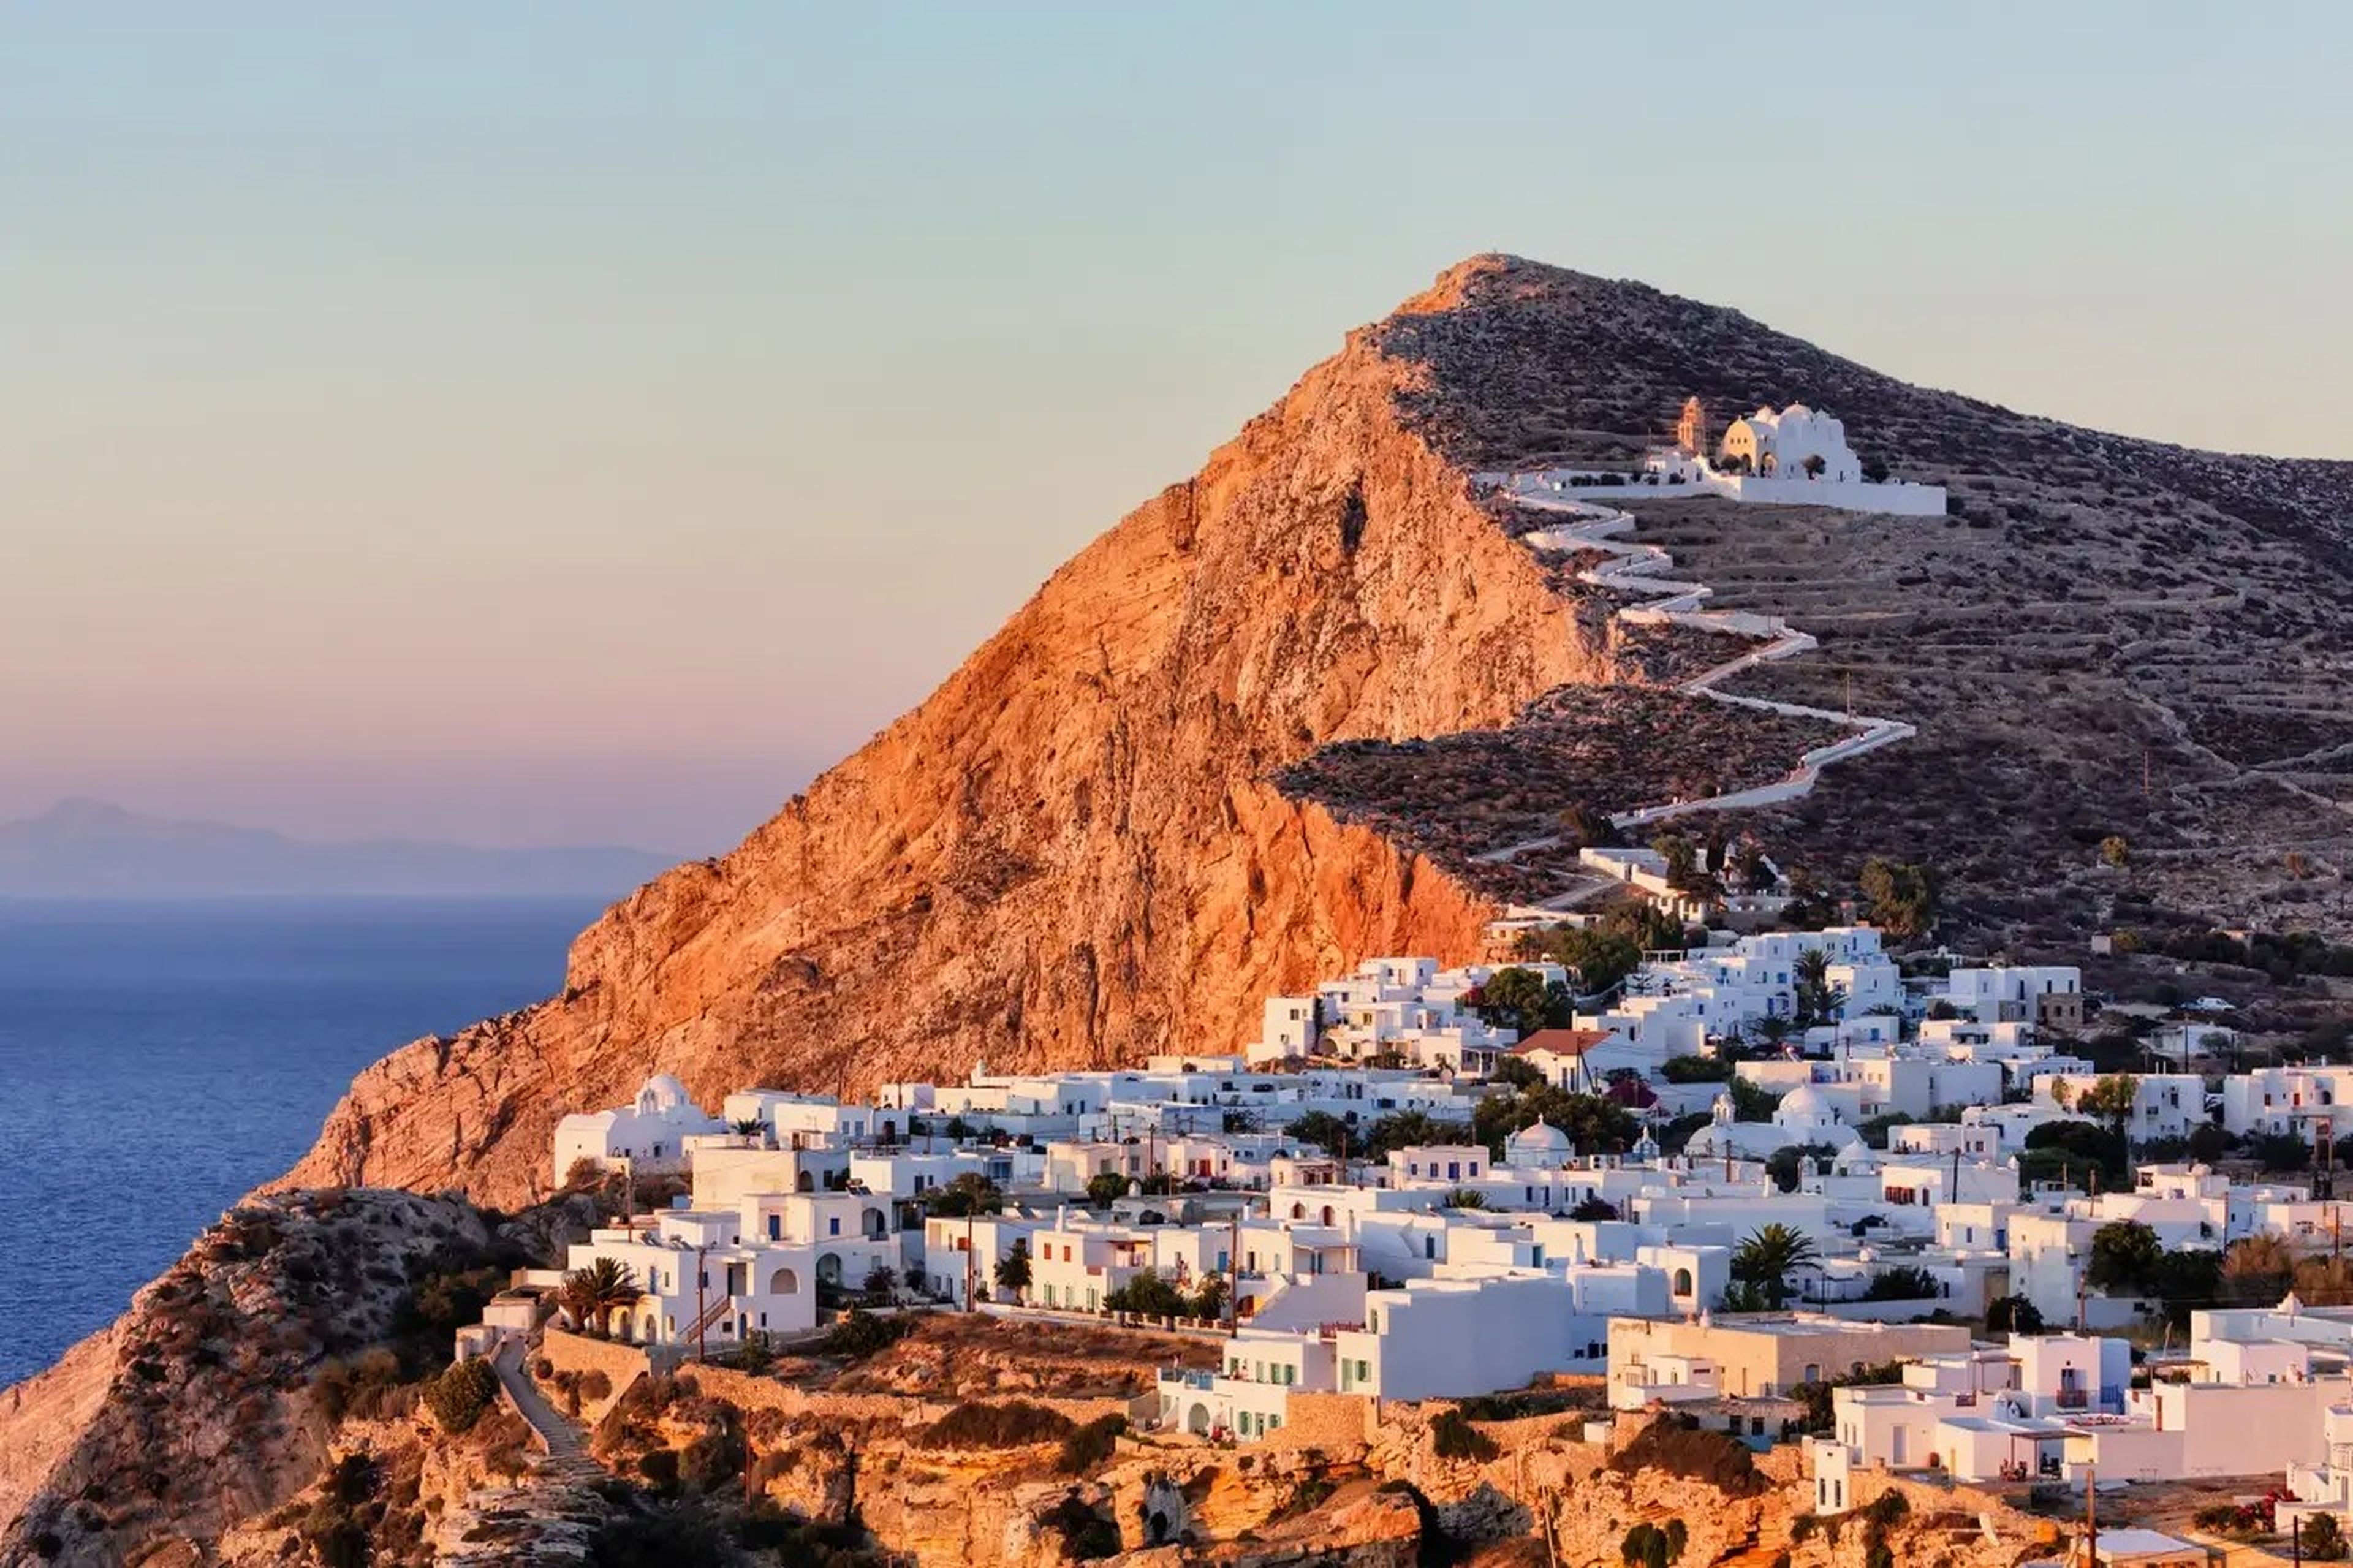 White homes dot the mountainside of the Folegandros island overlooking the Aegan Sea